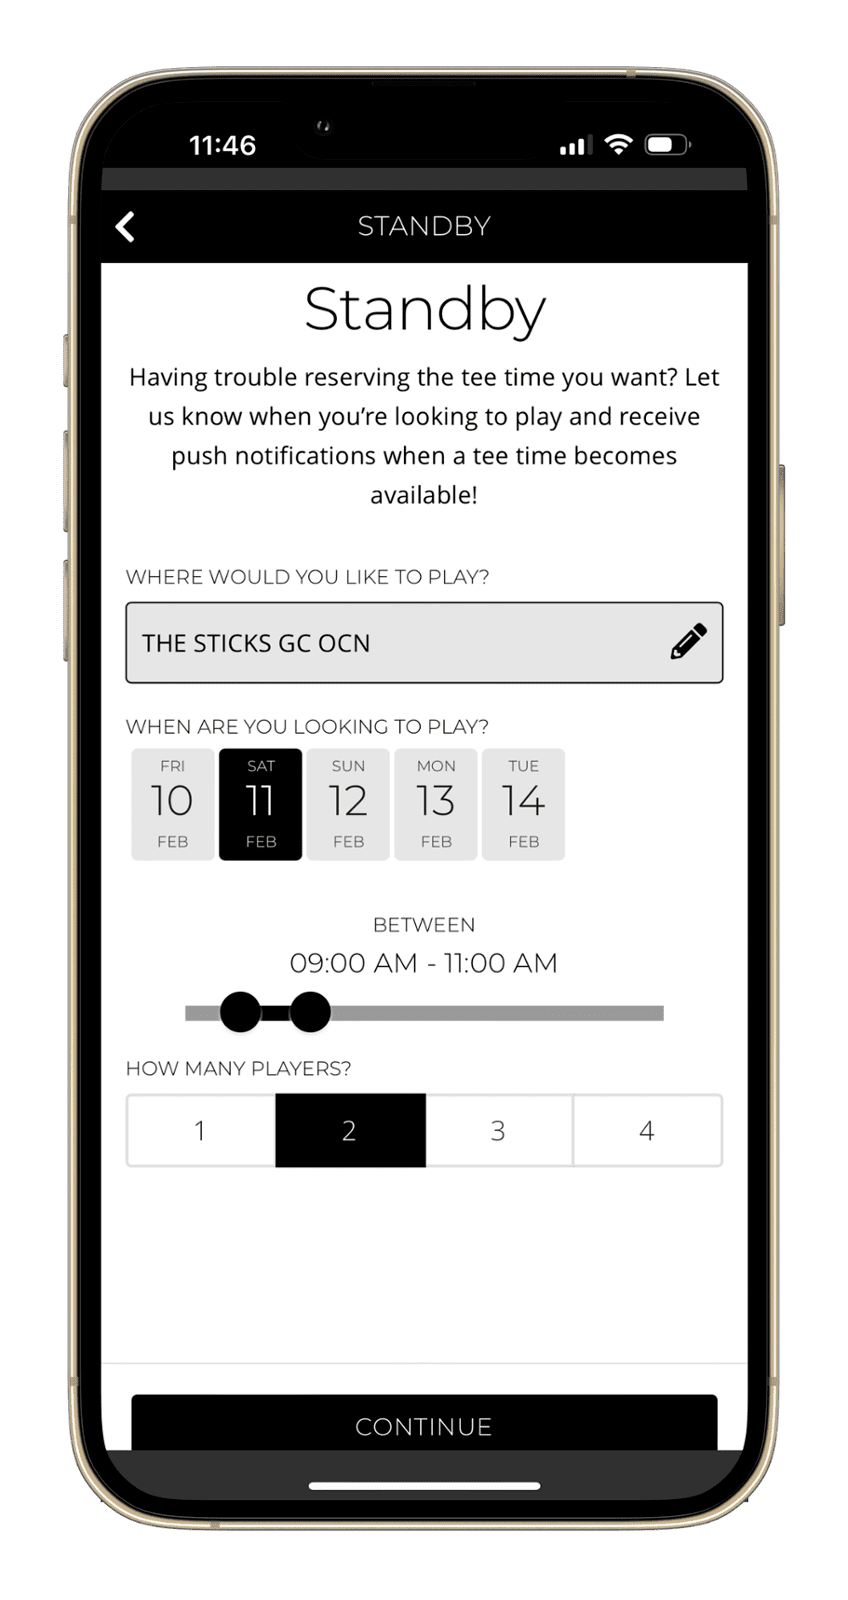 Create standby window to get alerted for canceled tee times